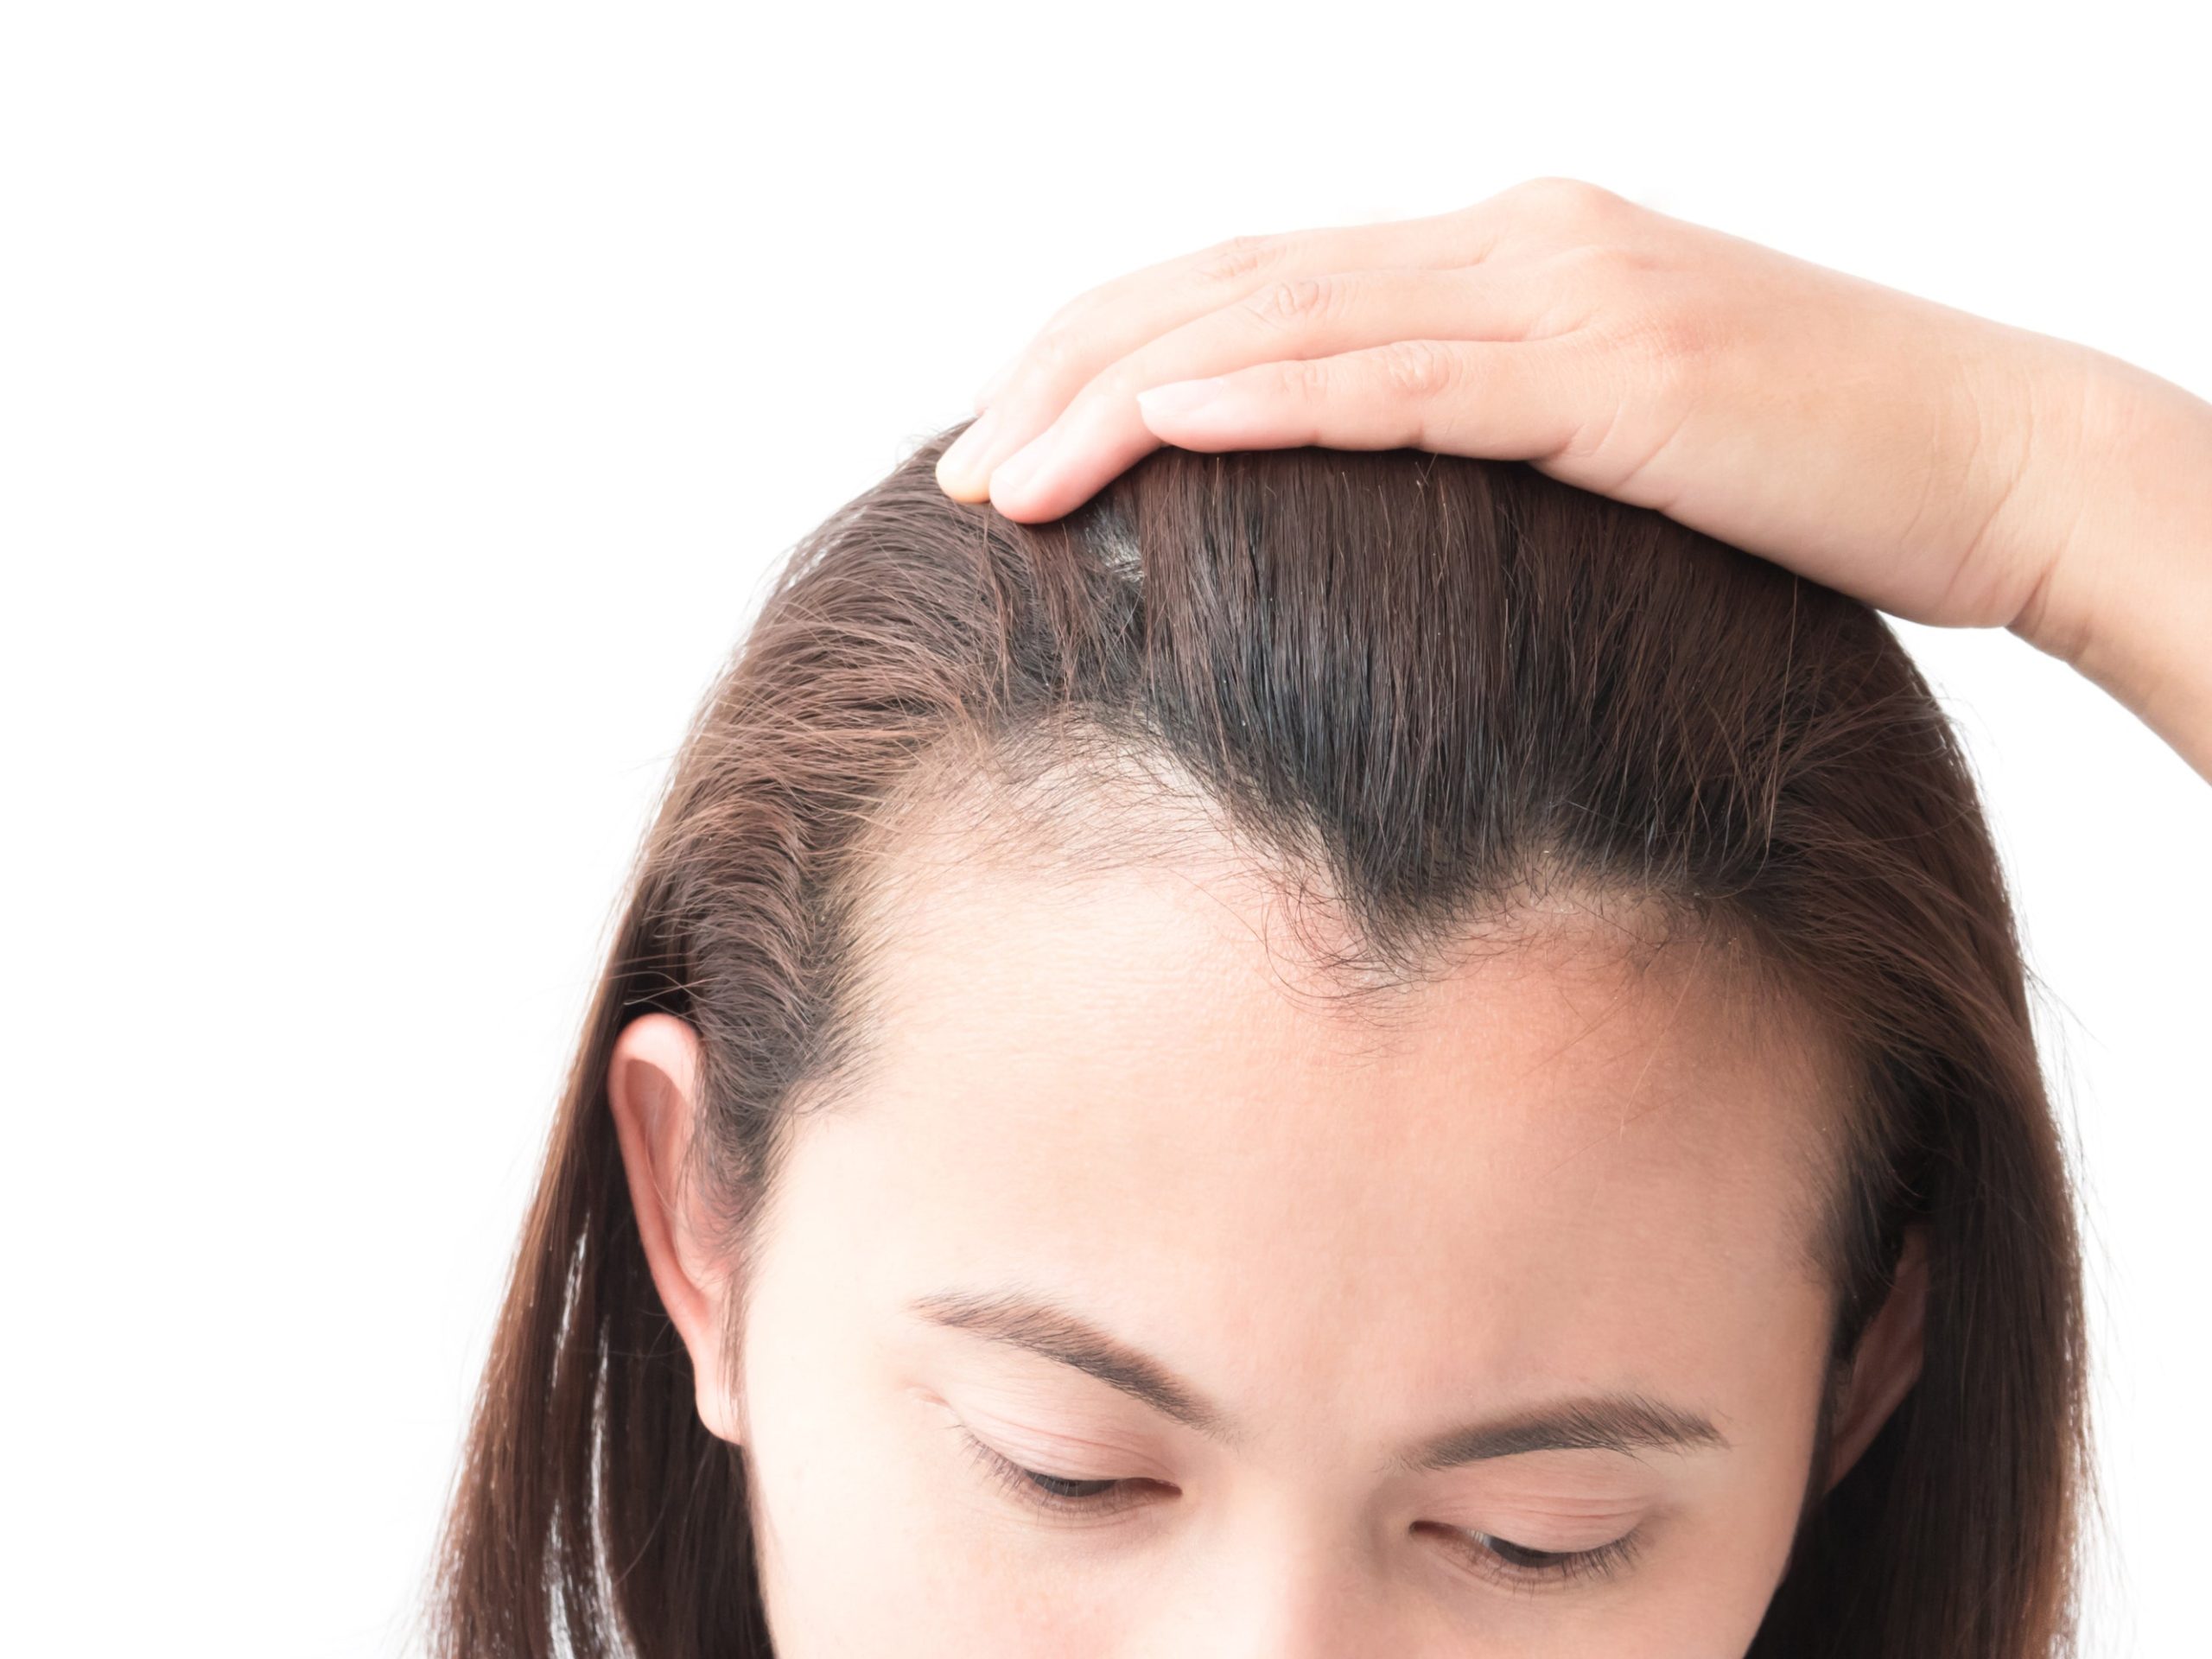 Hairstyles Likely to Cause Hair Loss or Thinning Hair